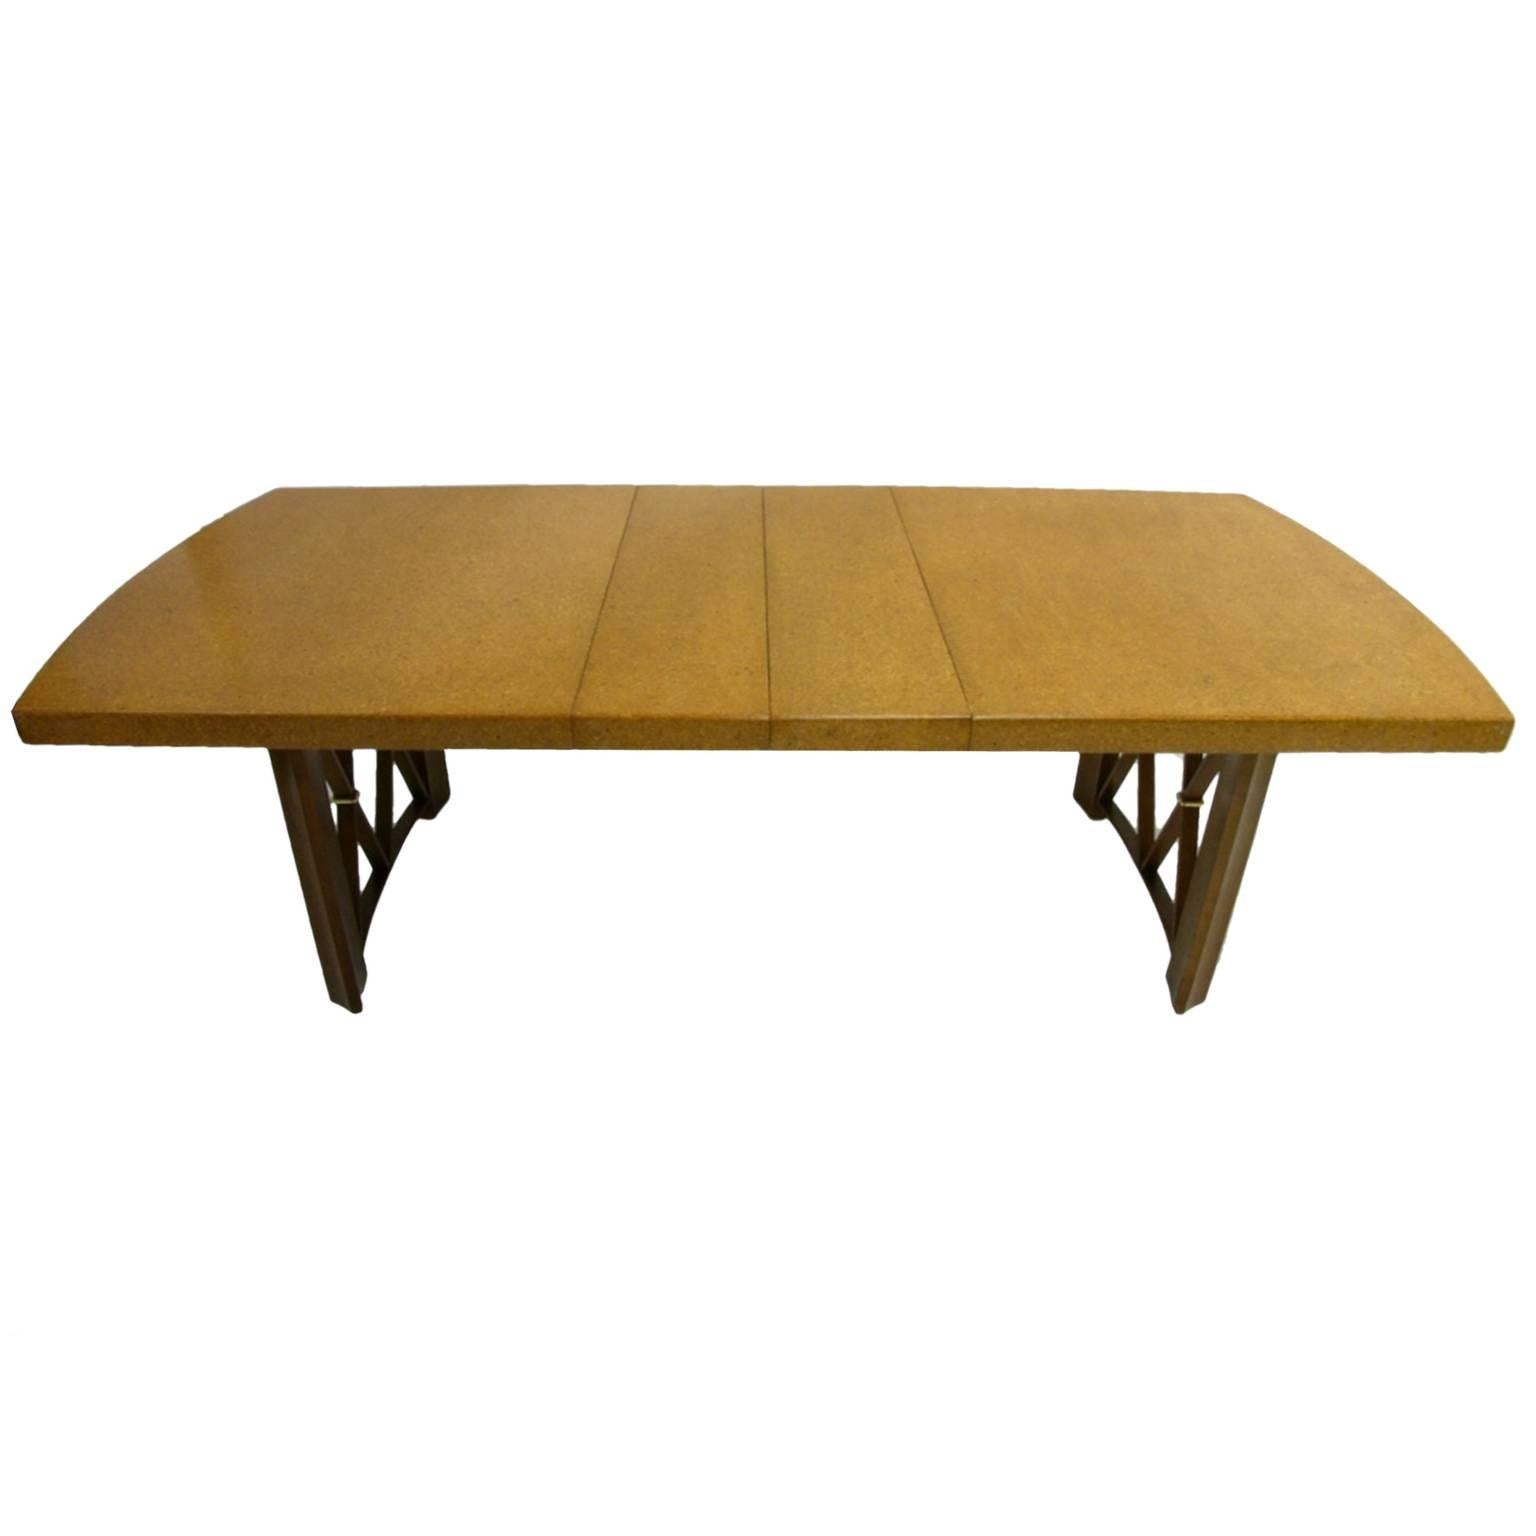 Stunning Paul Frankl Cork Top Dining Table by Johnson Furniture Company 1